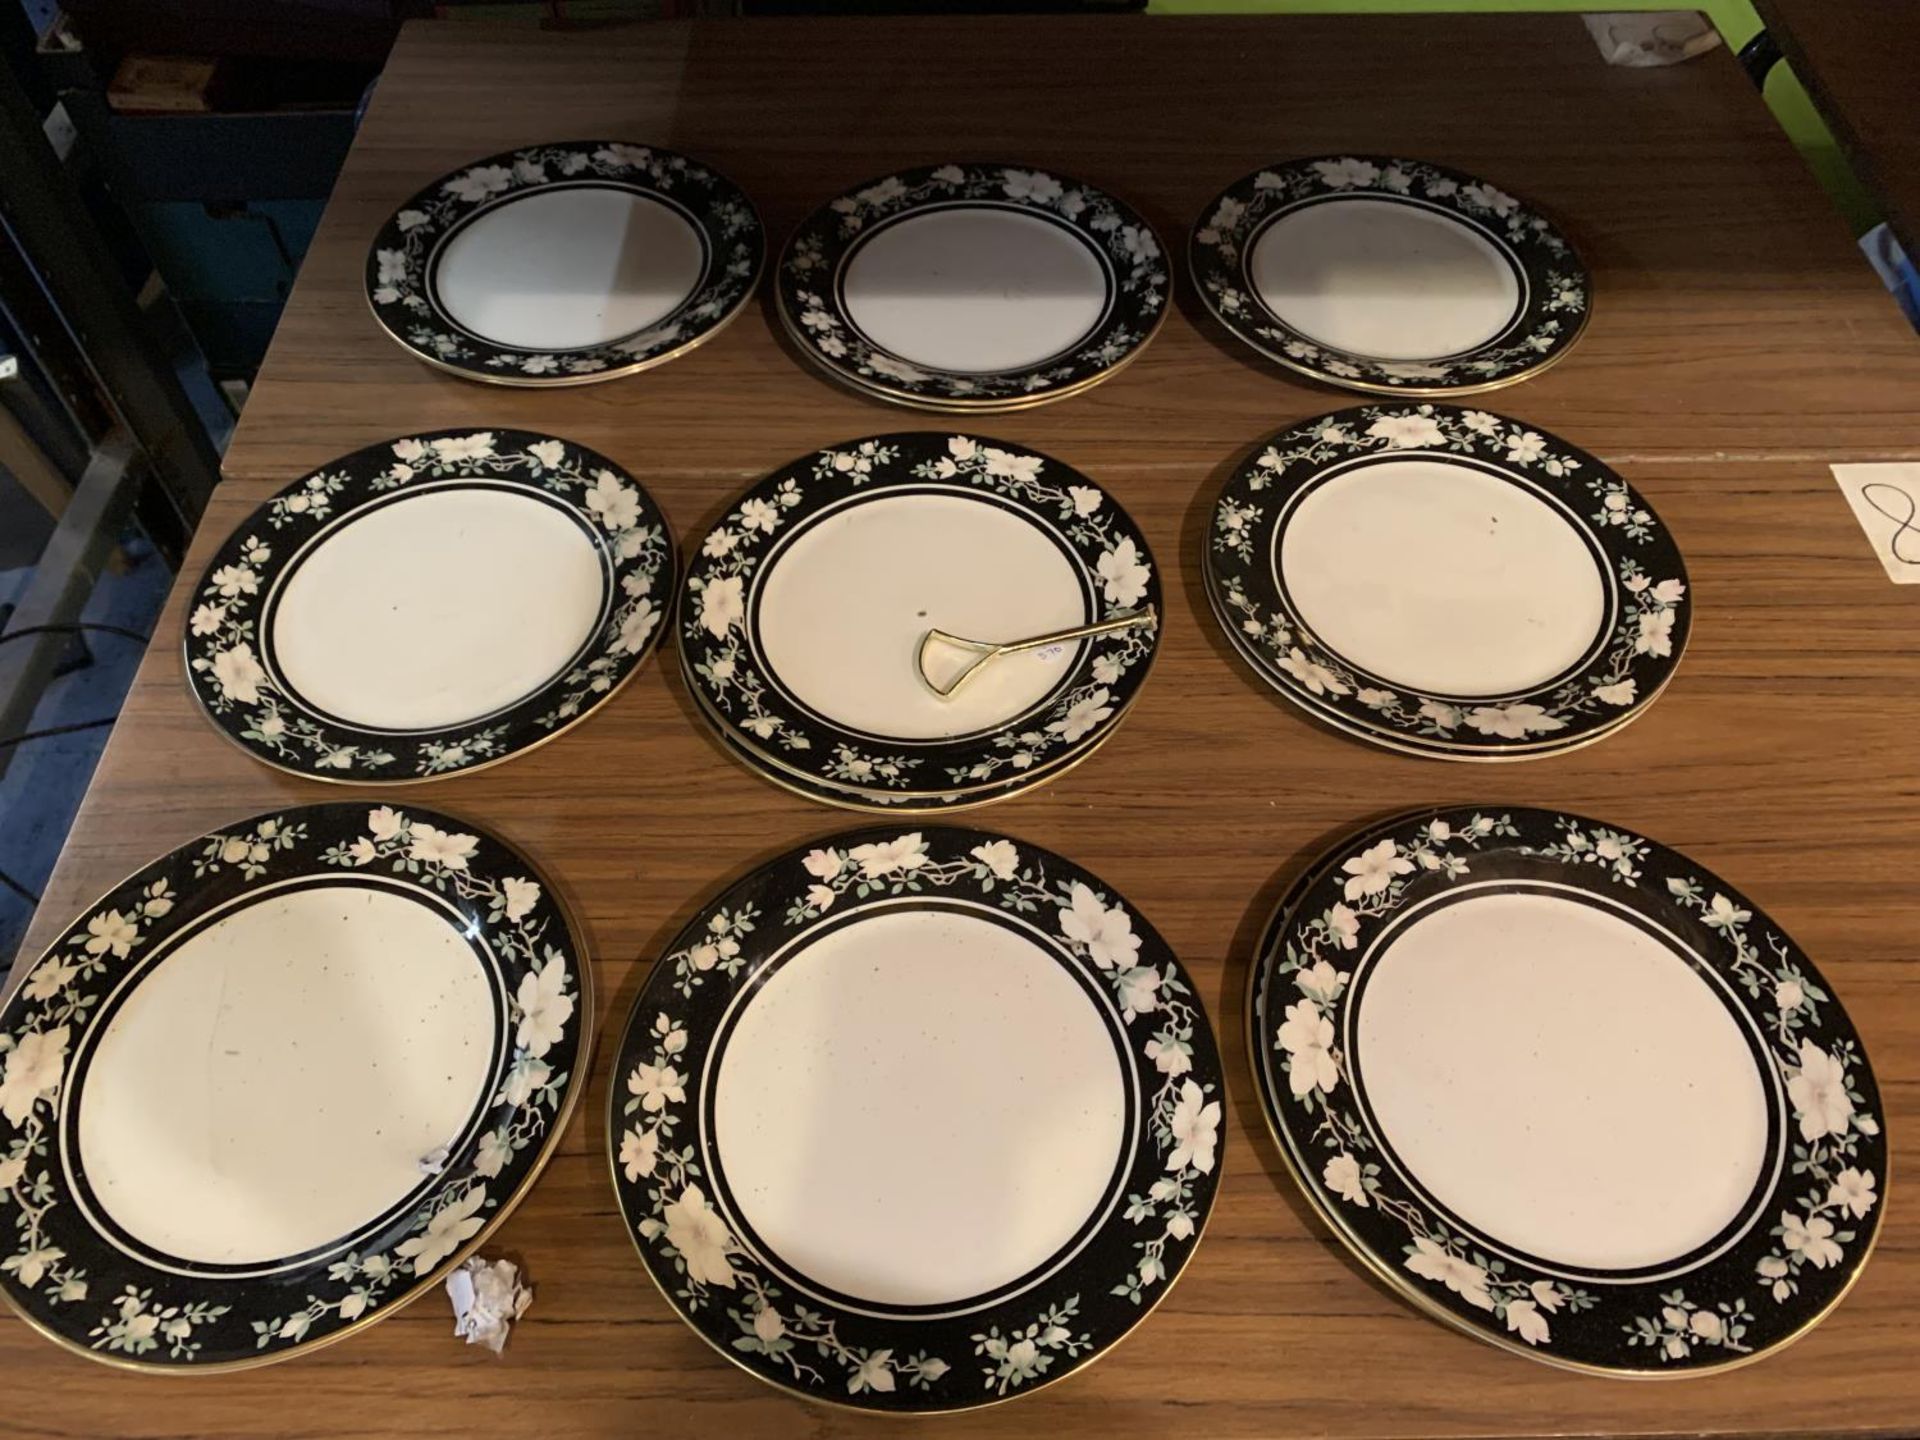 FIFTEEN ROYAL DOULTON VOGUE COLLECTION DINNER PLATES AND A THREE TIERED CAKE STAND - Image 2 of 6